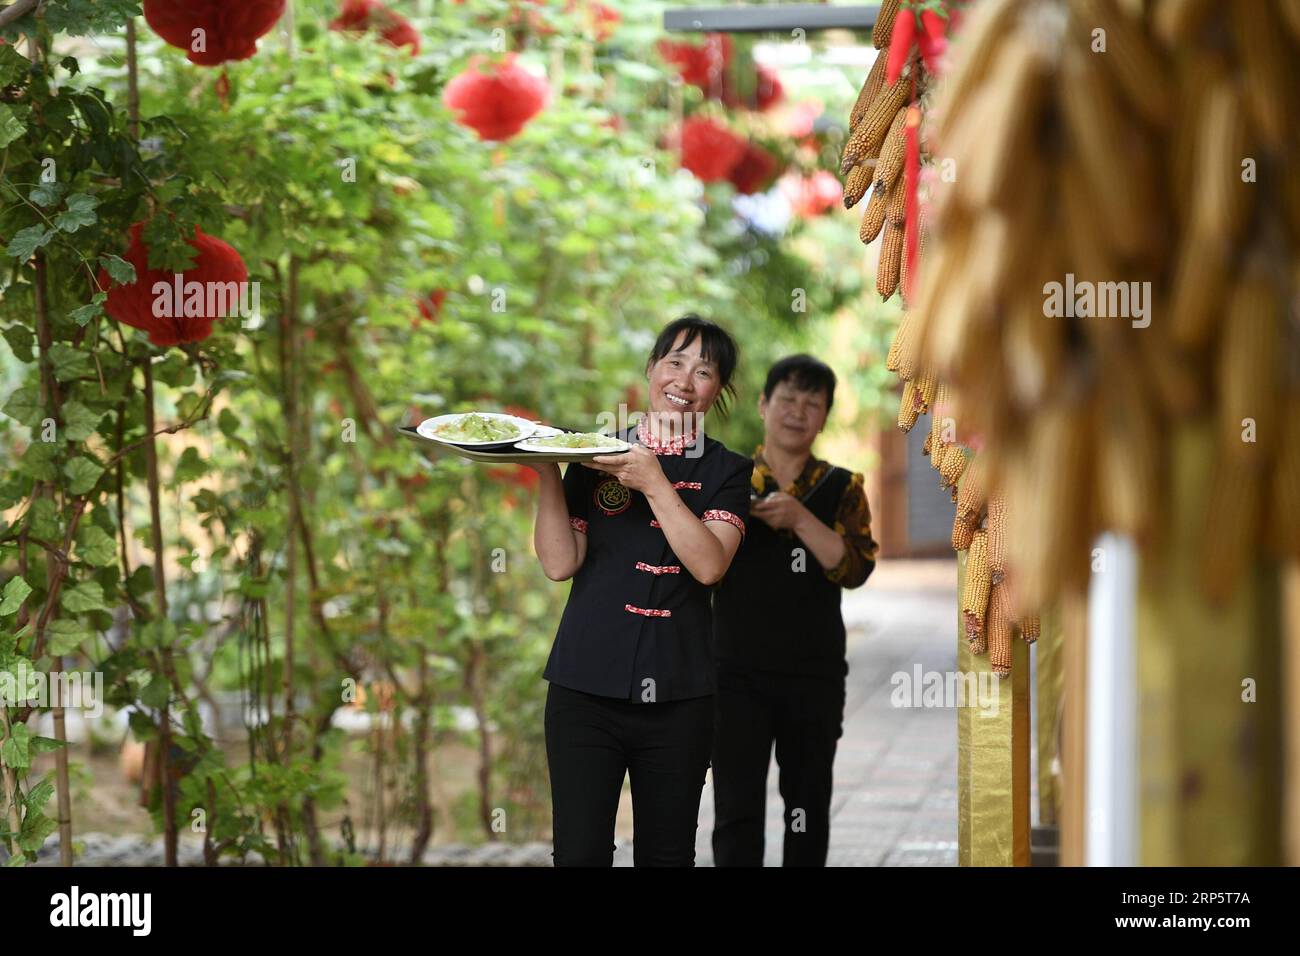 (181223) -- BEIJING, Dec. 23, 2018 (Xinhua) -- Staff members serve dishes at a restaurant in Longwangba Village of Xiji County in Guyuan, northwest China s Ningxia Hui Autonomous Region, Aug. 30, 2018. The village founded a cooperation to develop rural tourism, poultry farming and peony and organic strawberry planting. So far, Longwangba Village has been lifted out of poverty. It sees about 160,000 tourist trips per year. Areas of China suffering from extreme poverty have made faster progress in terms of poverty relief compared to the country s average pace in 2018, an official has said. The c Stock Photo